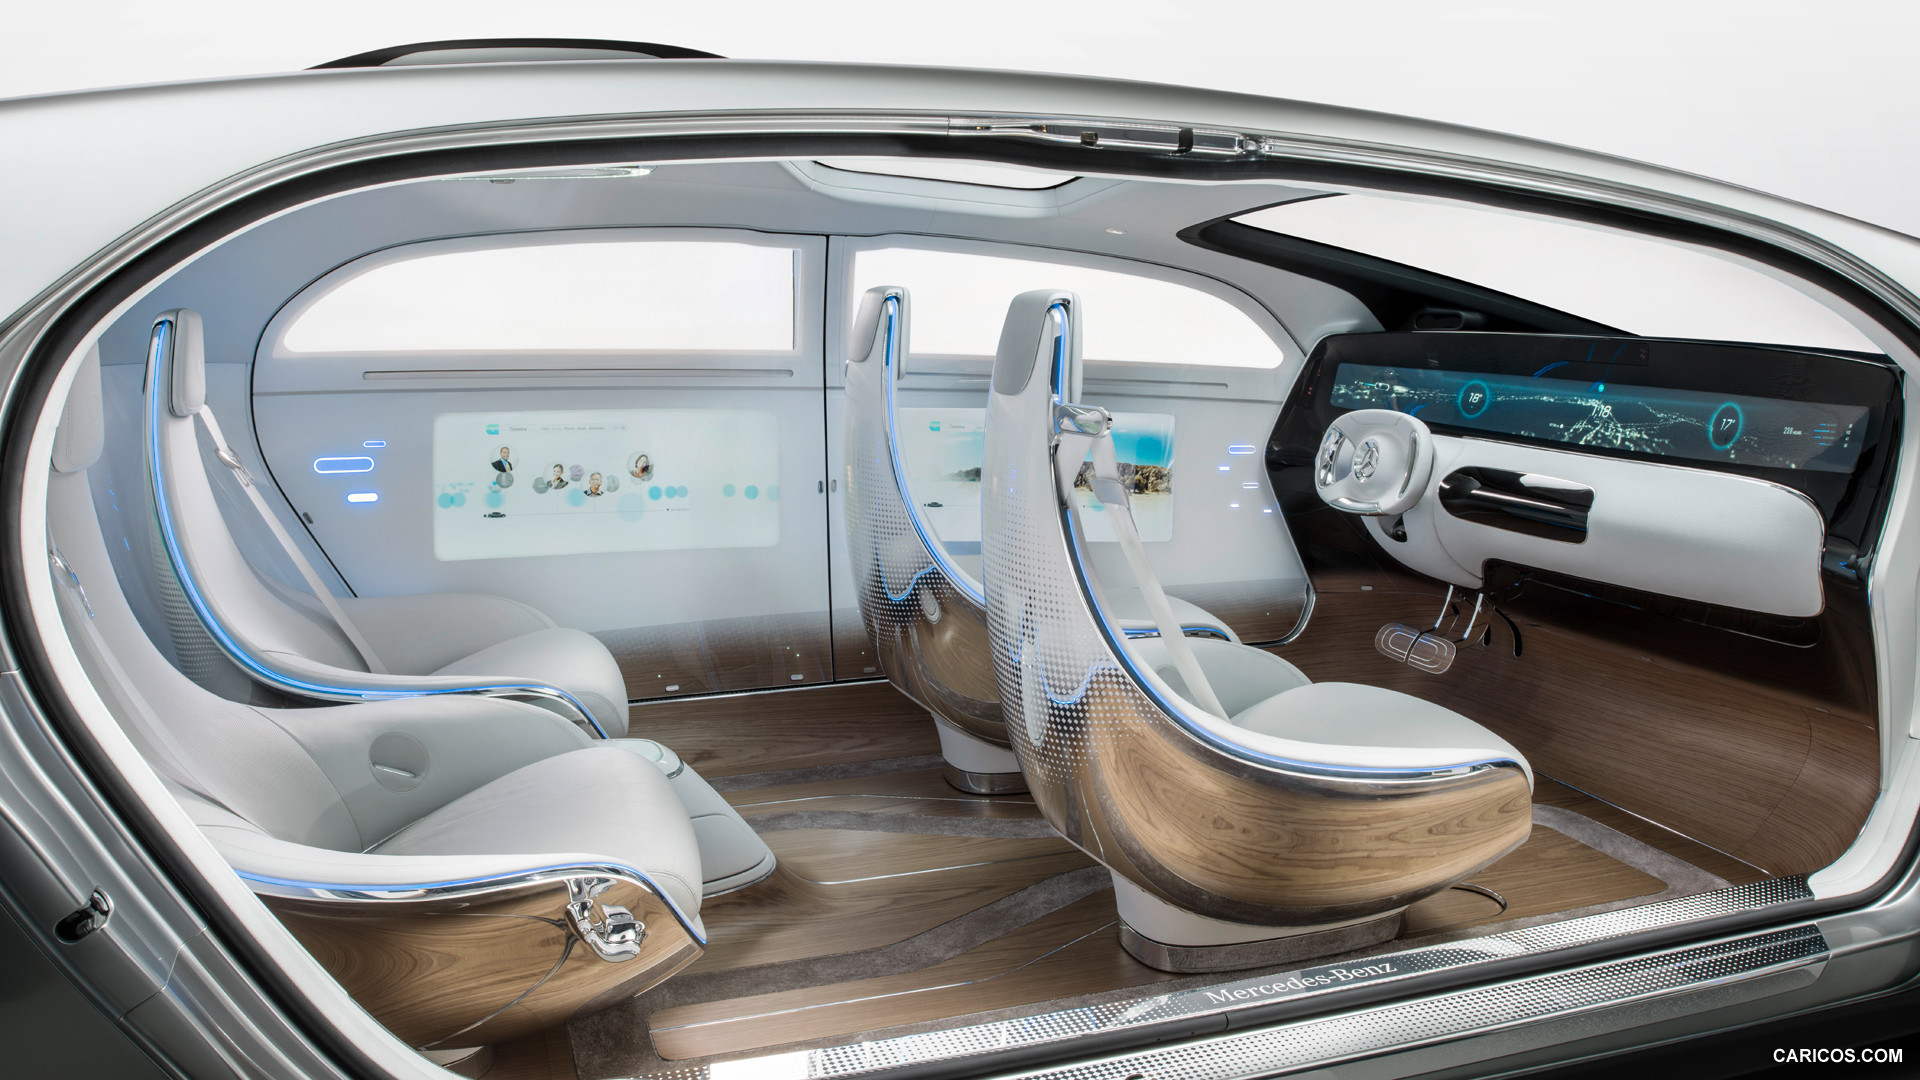 2015 Mercedes-Benz F 015 Luxury in Motion Concept  - Interior, #24 of 92